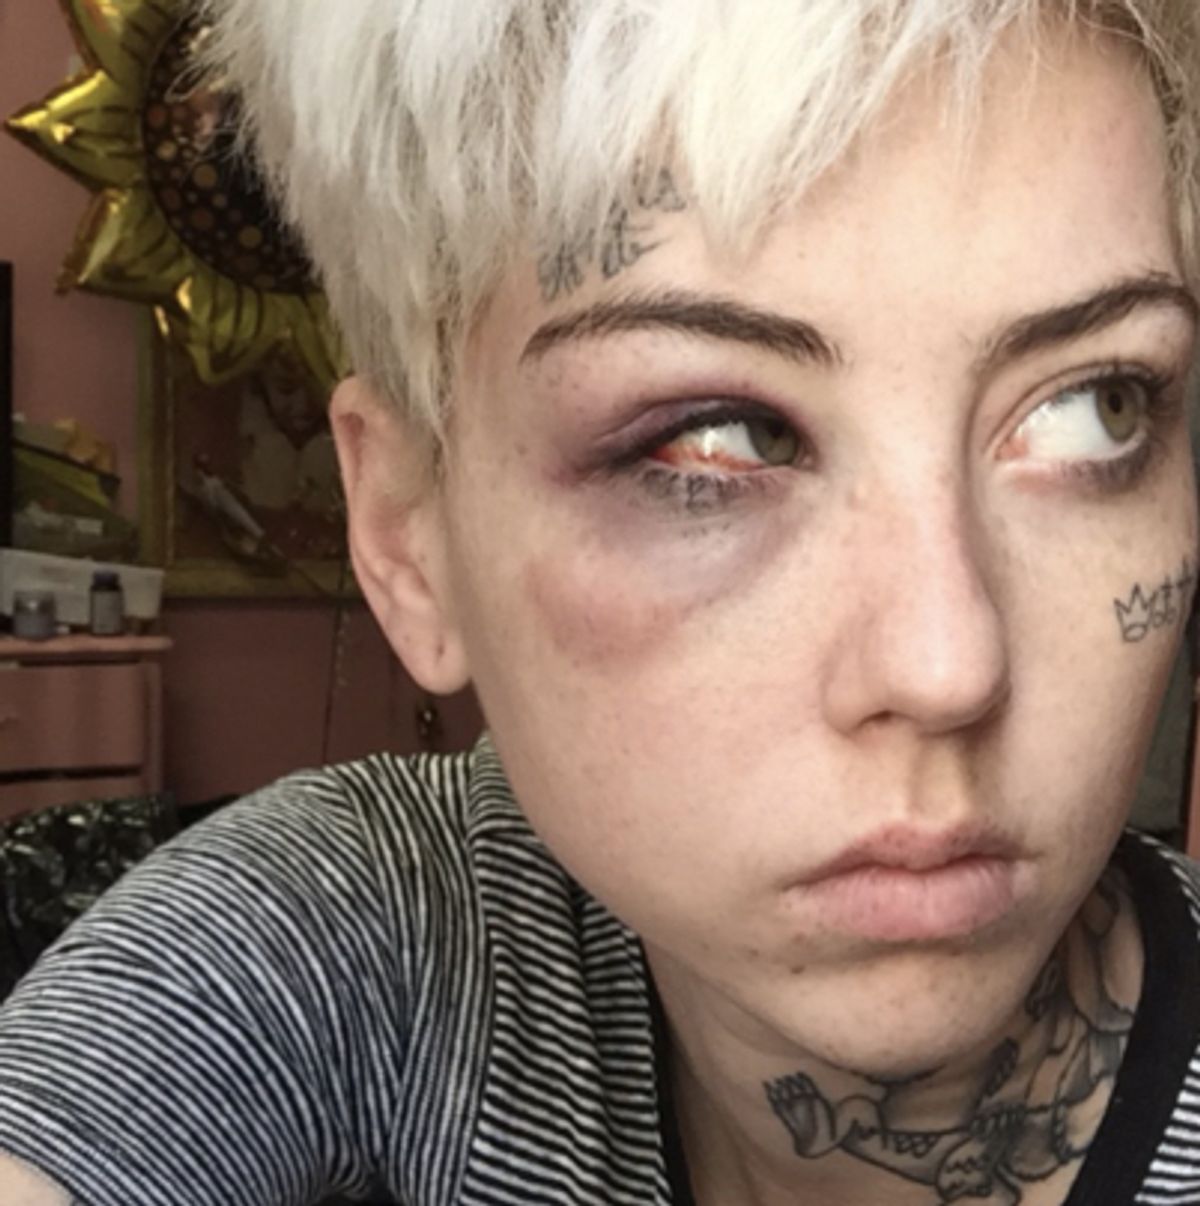 Los Angeles artist Illma Gore, 24, says she was accosted and punched over her drawing of a naked Donald Trump (Illma Gore)